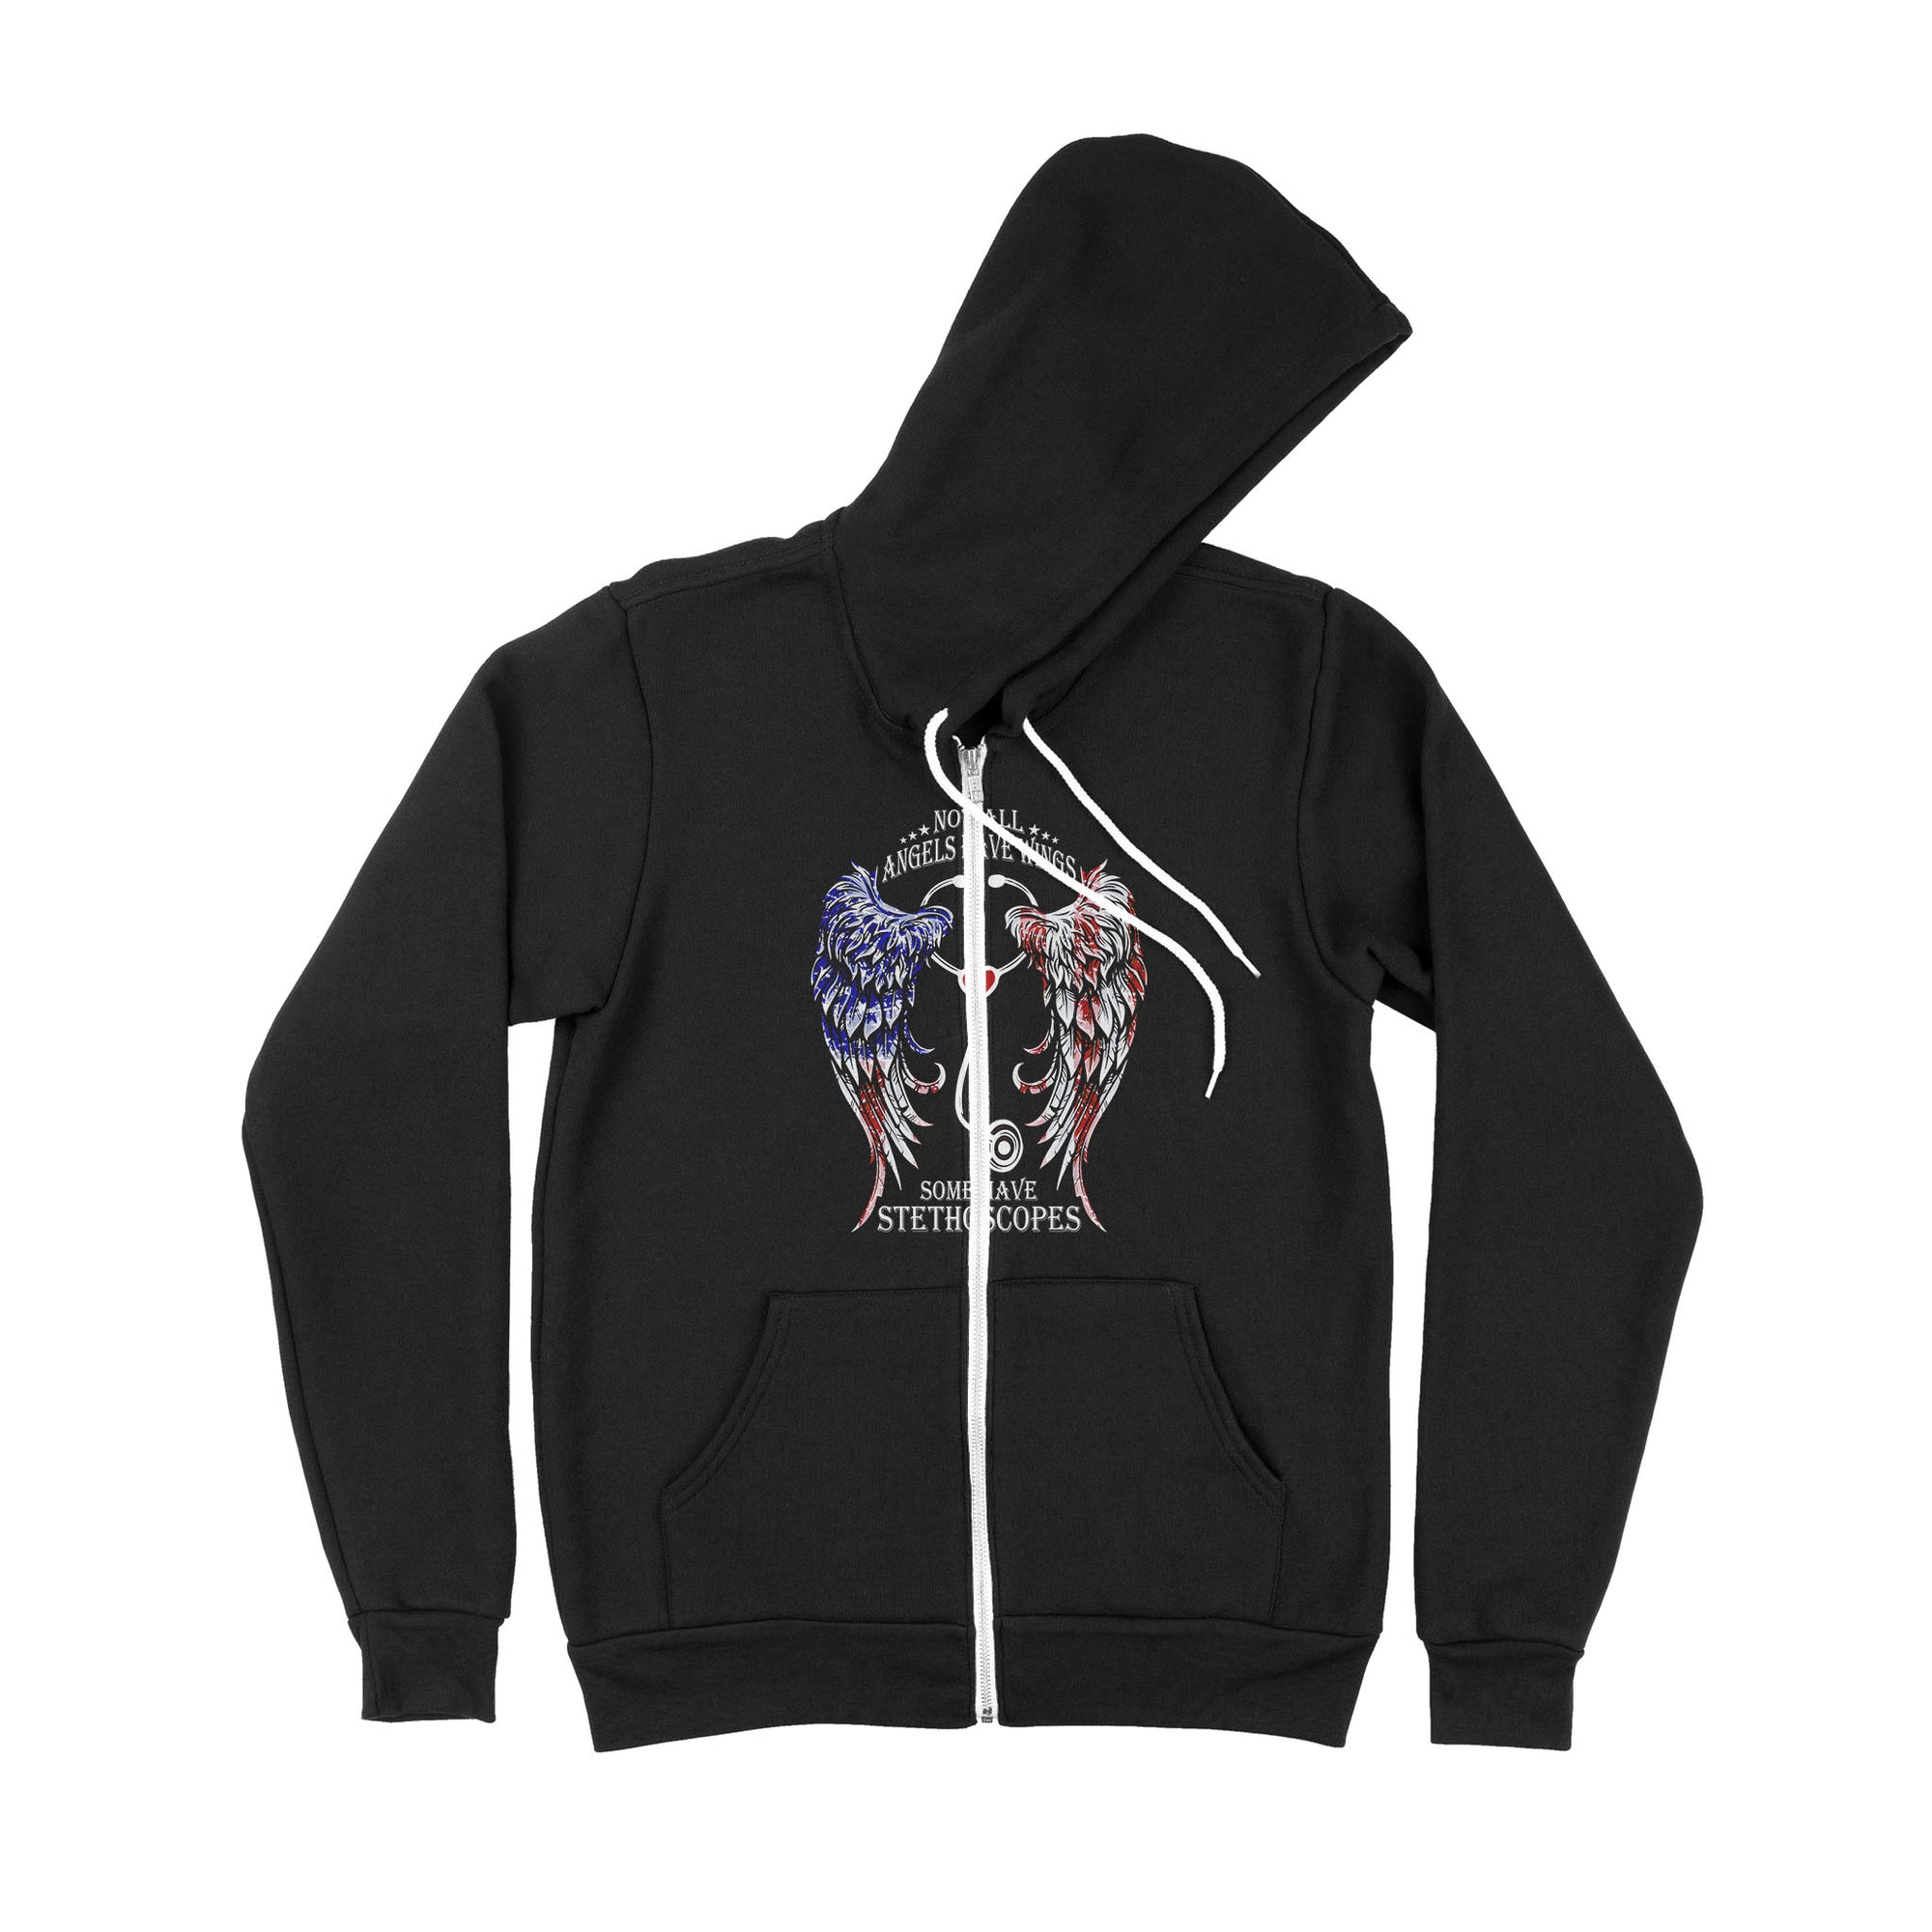 Not All Angels Have Wings Some Have Stethoscopes Medical - Nurse - Doctor - Hospital - Premium Zip Hoodie